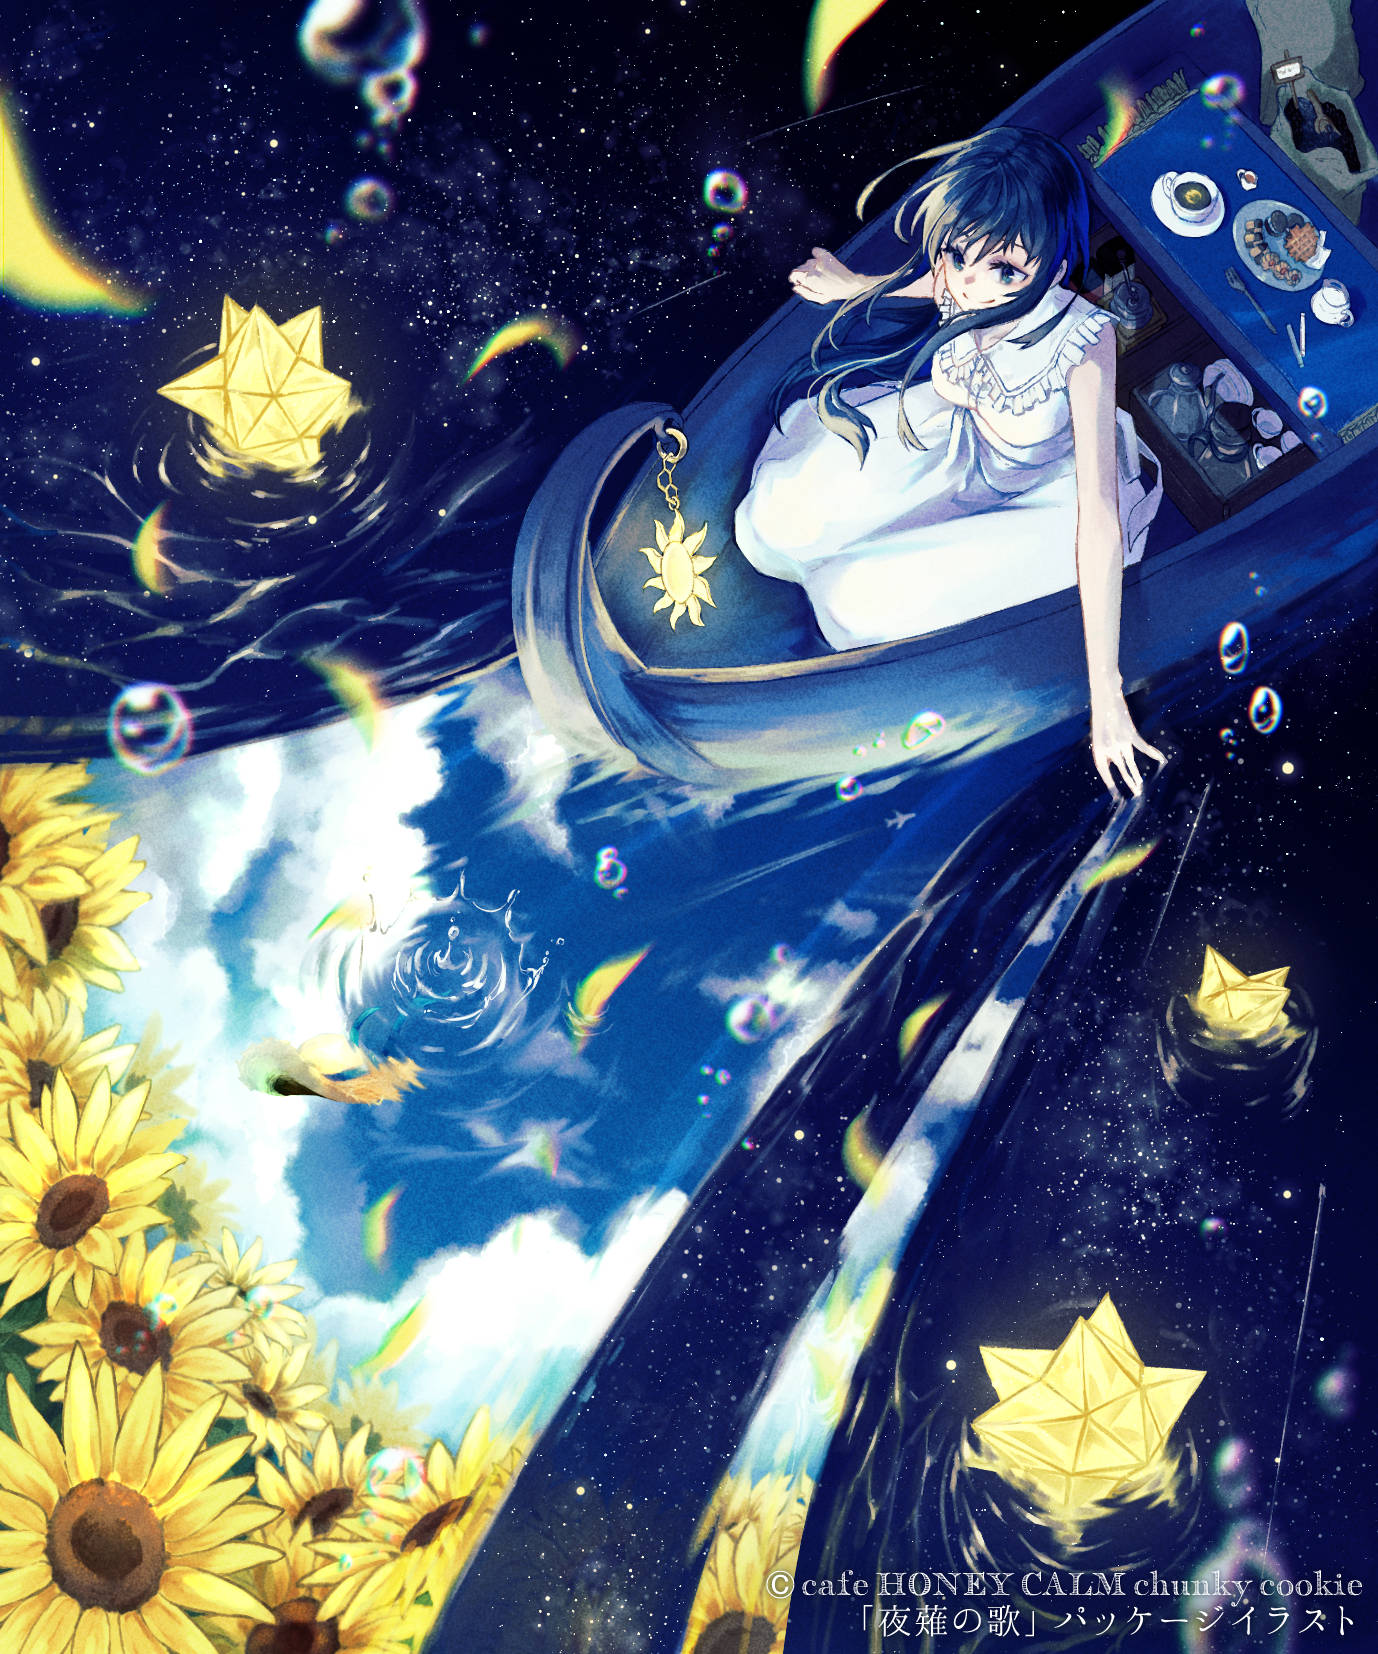 Portrait Display Sunflowers Starry Night Starred Sky White Dress Water Drops Bubbles Watermarked Boa 1378x1654